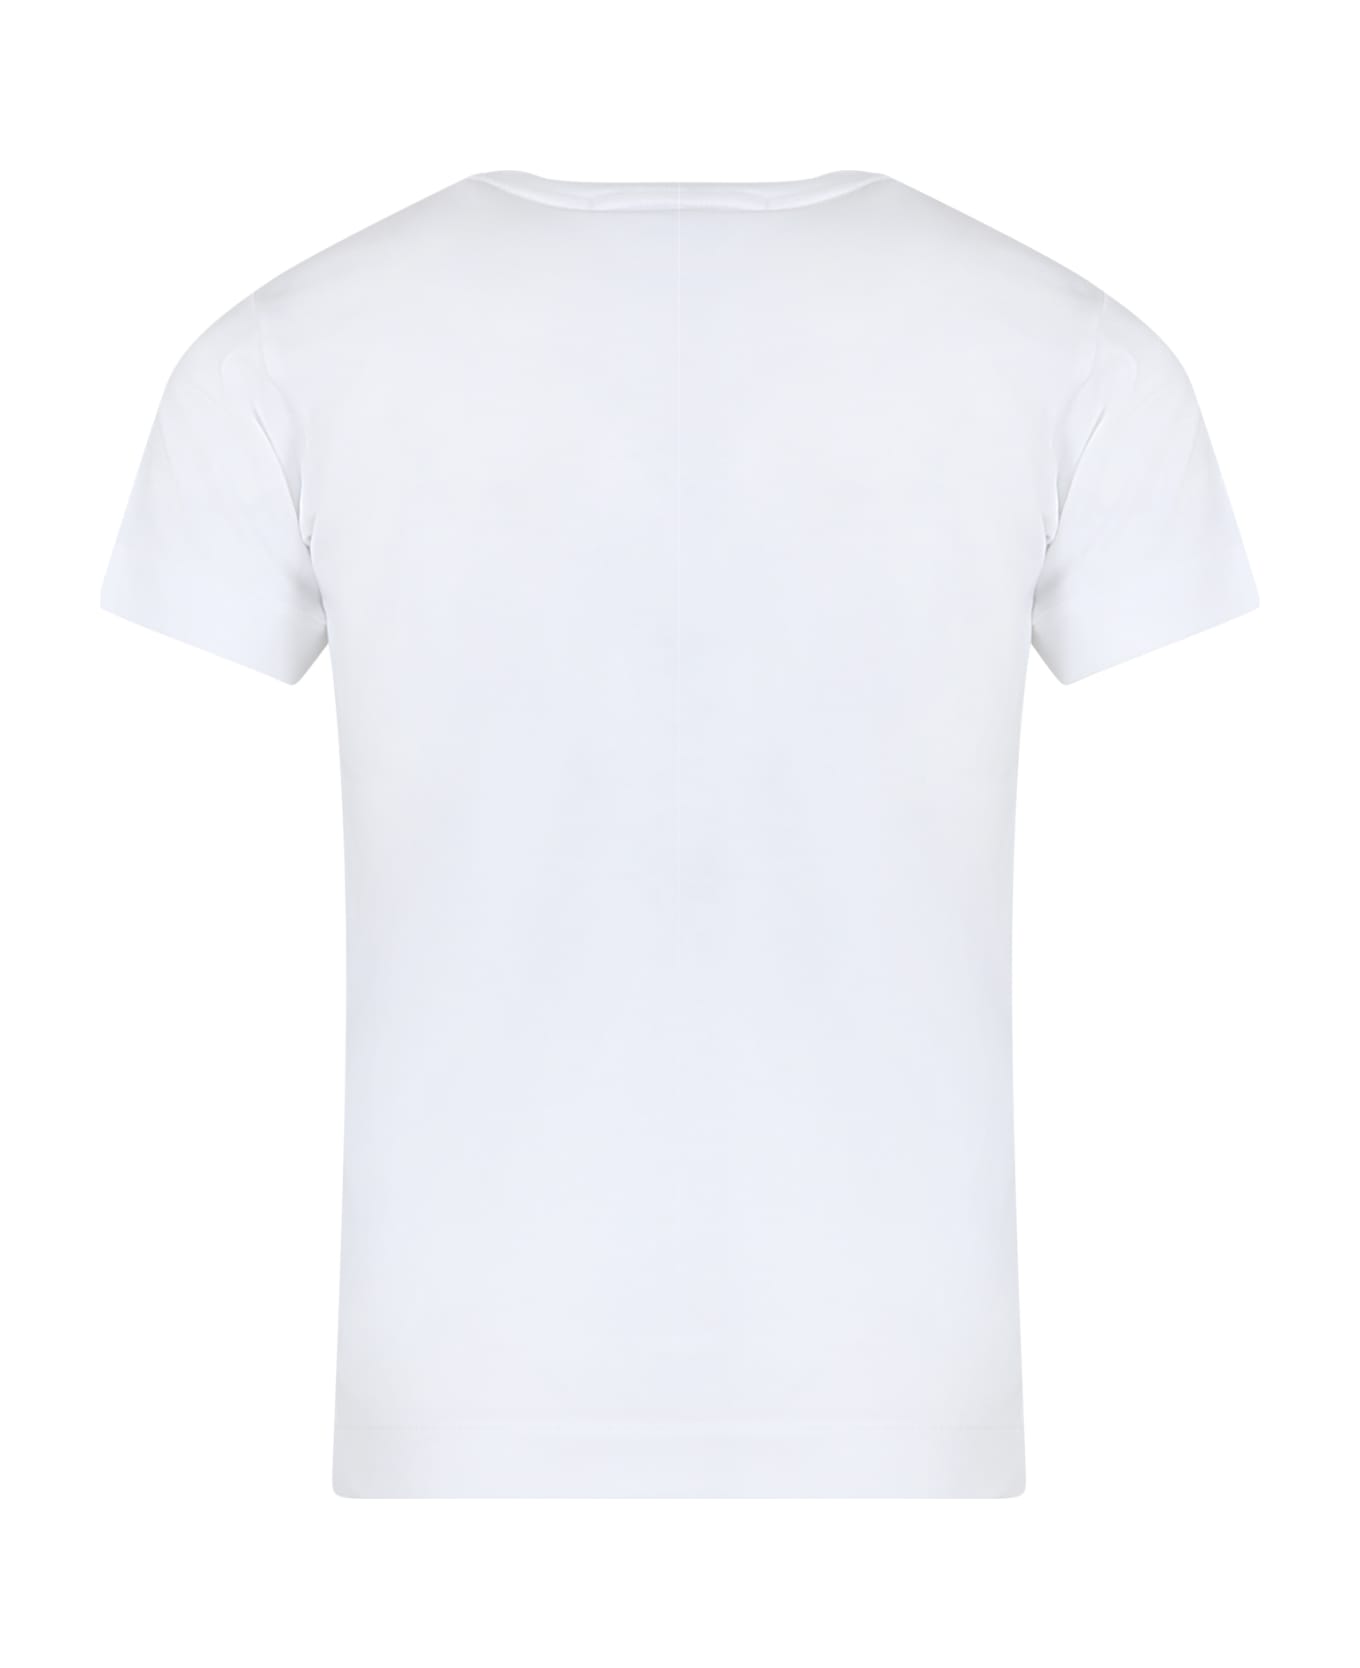 Stone Island Junior White T-shirt For Boy With Iconic Patch - White